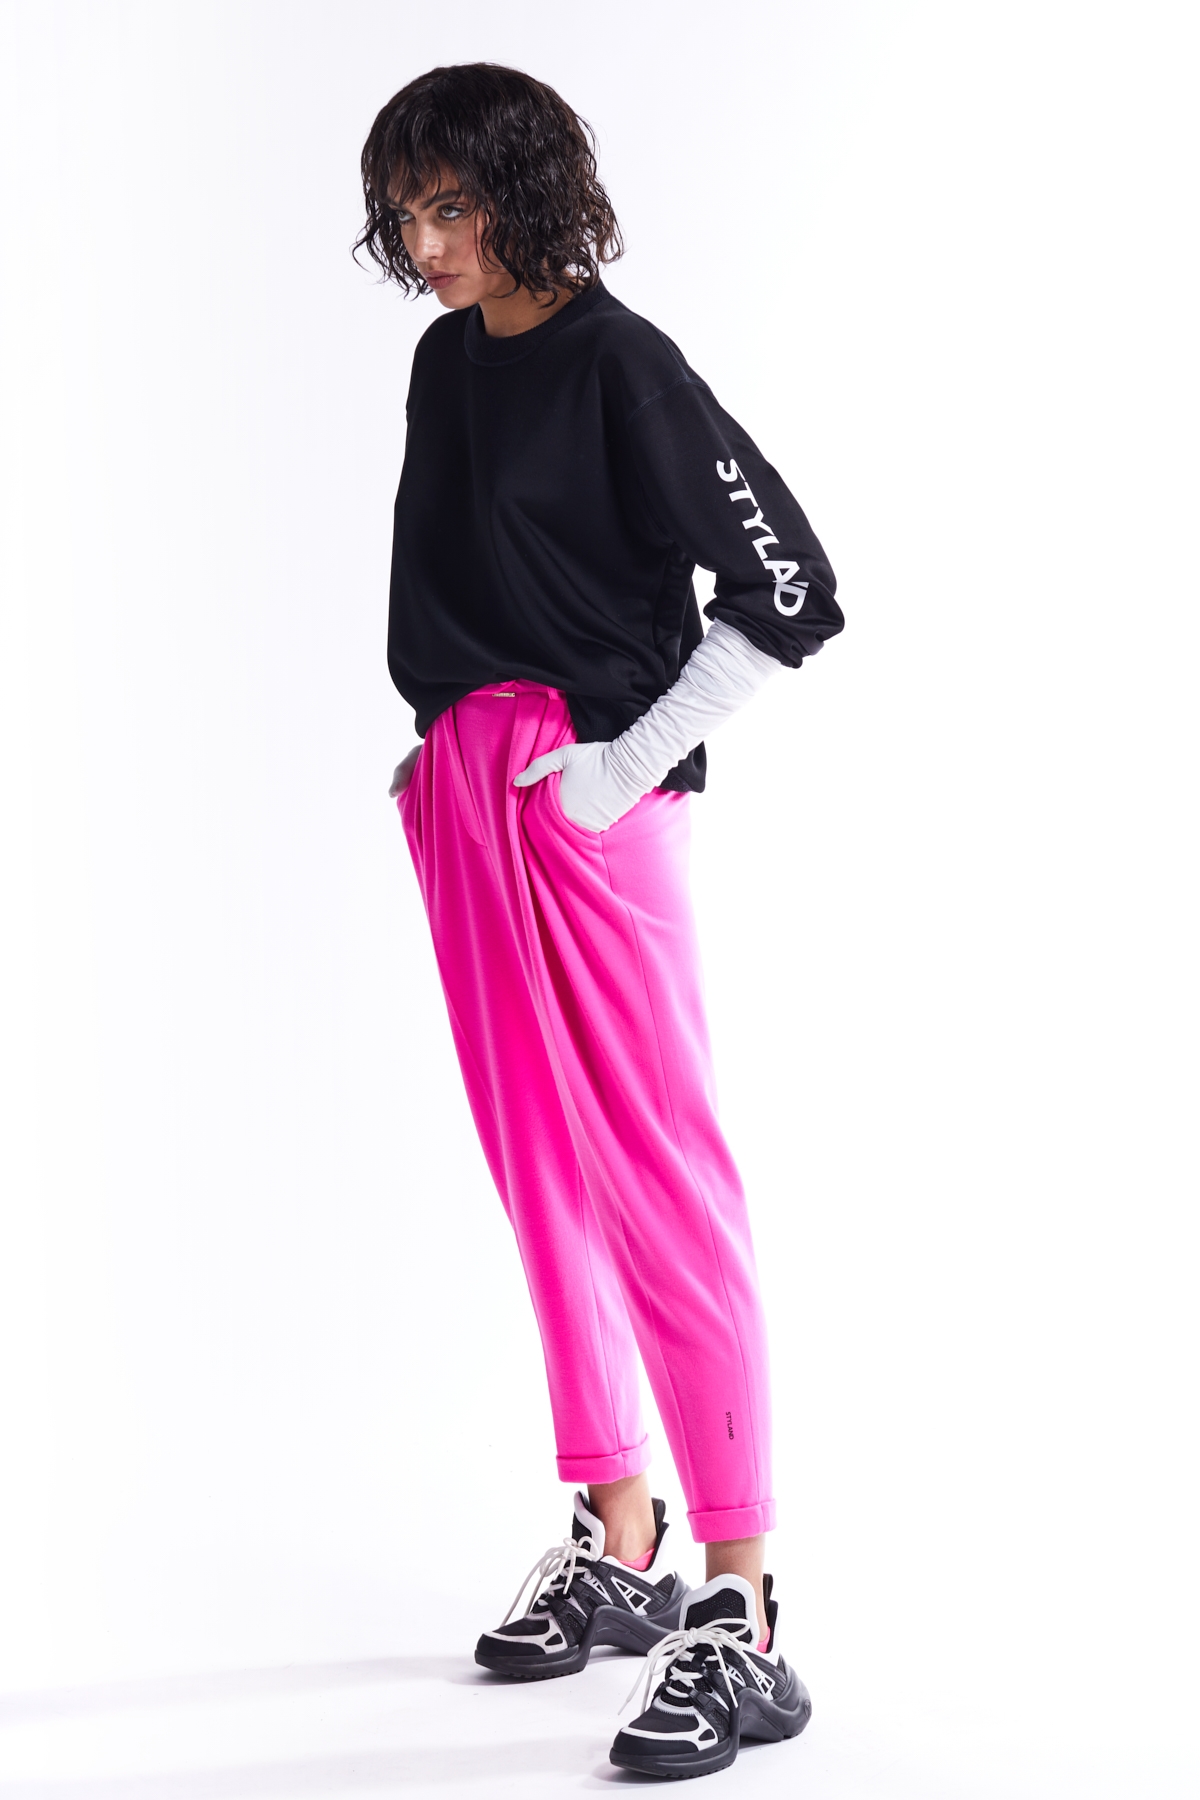 womens jersey tapered trousers